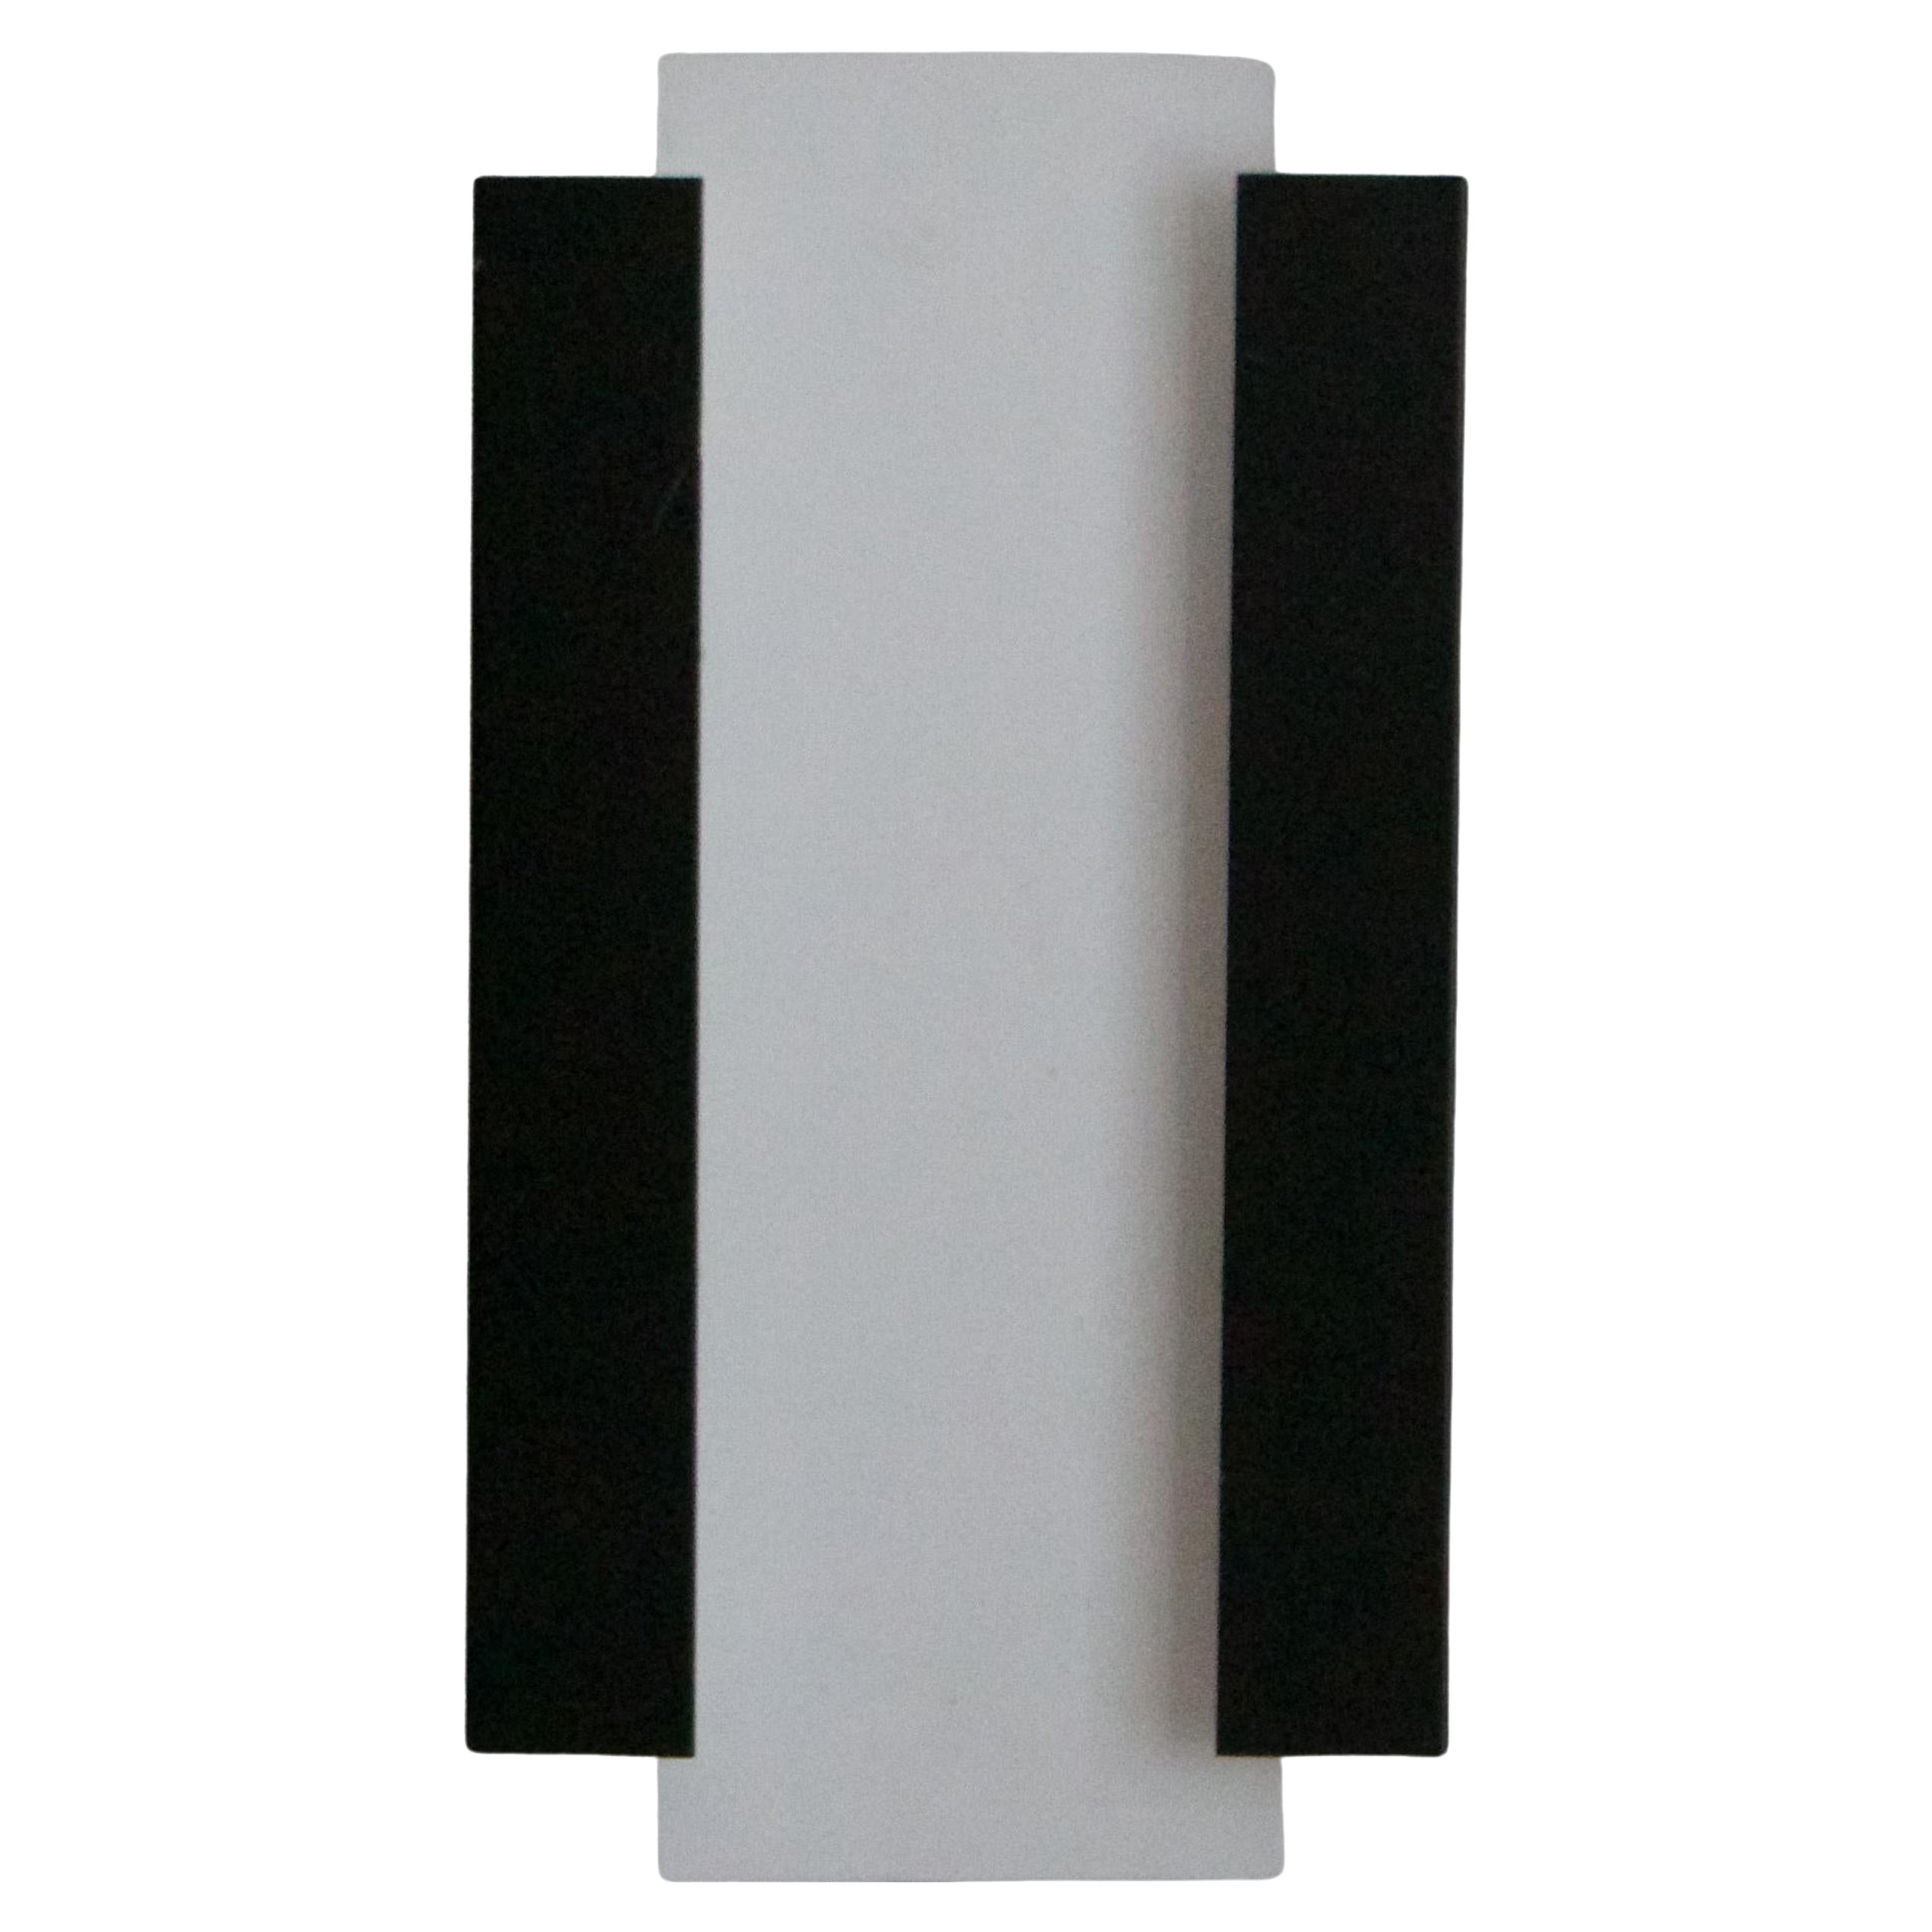 Itsu, Minimalist Wall Light, Black and White Lacquered Metal, Finland, 1950s